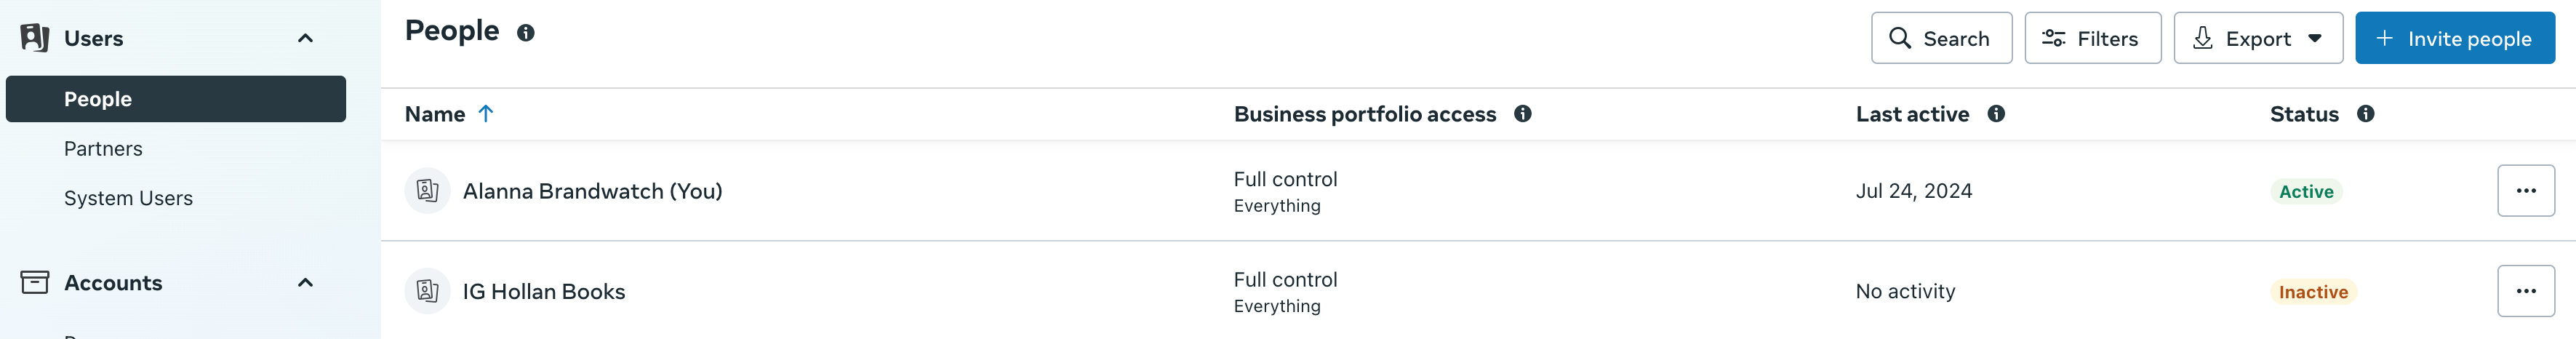 People menu for page in Meta Business Suite.png